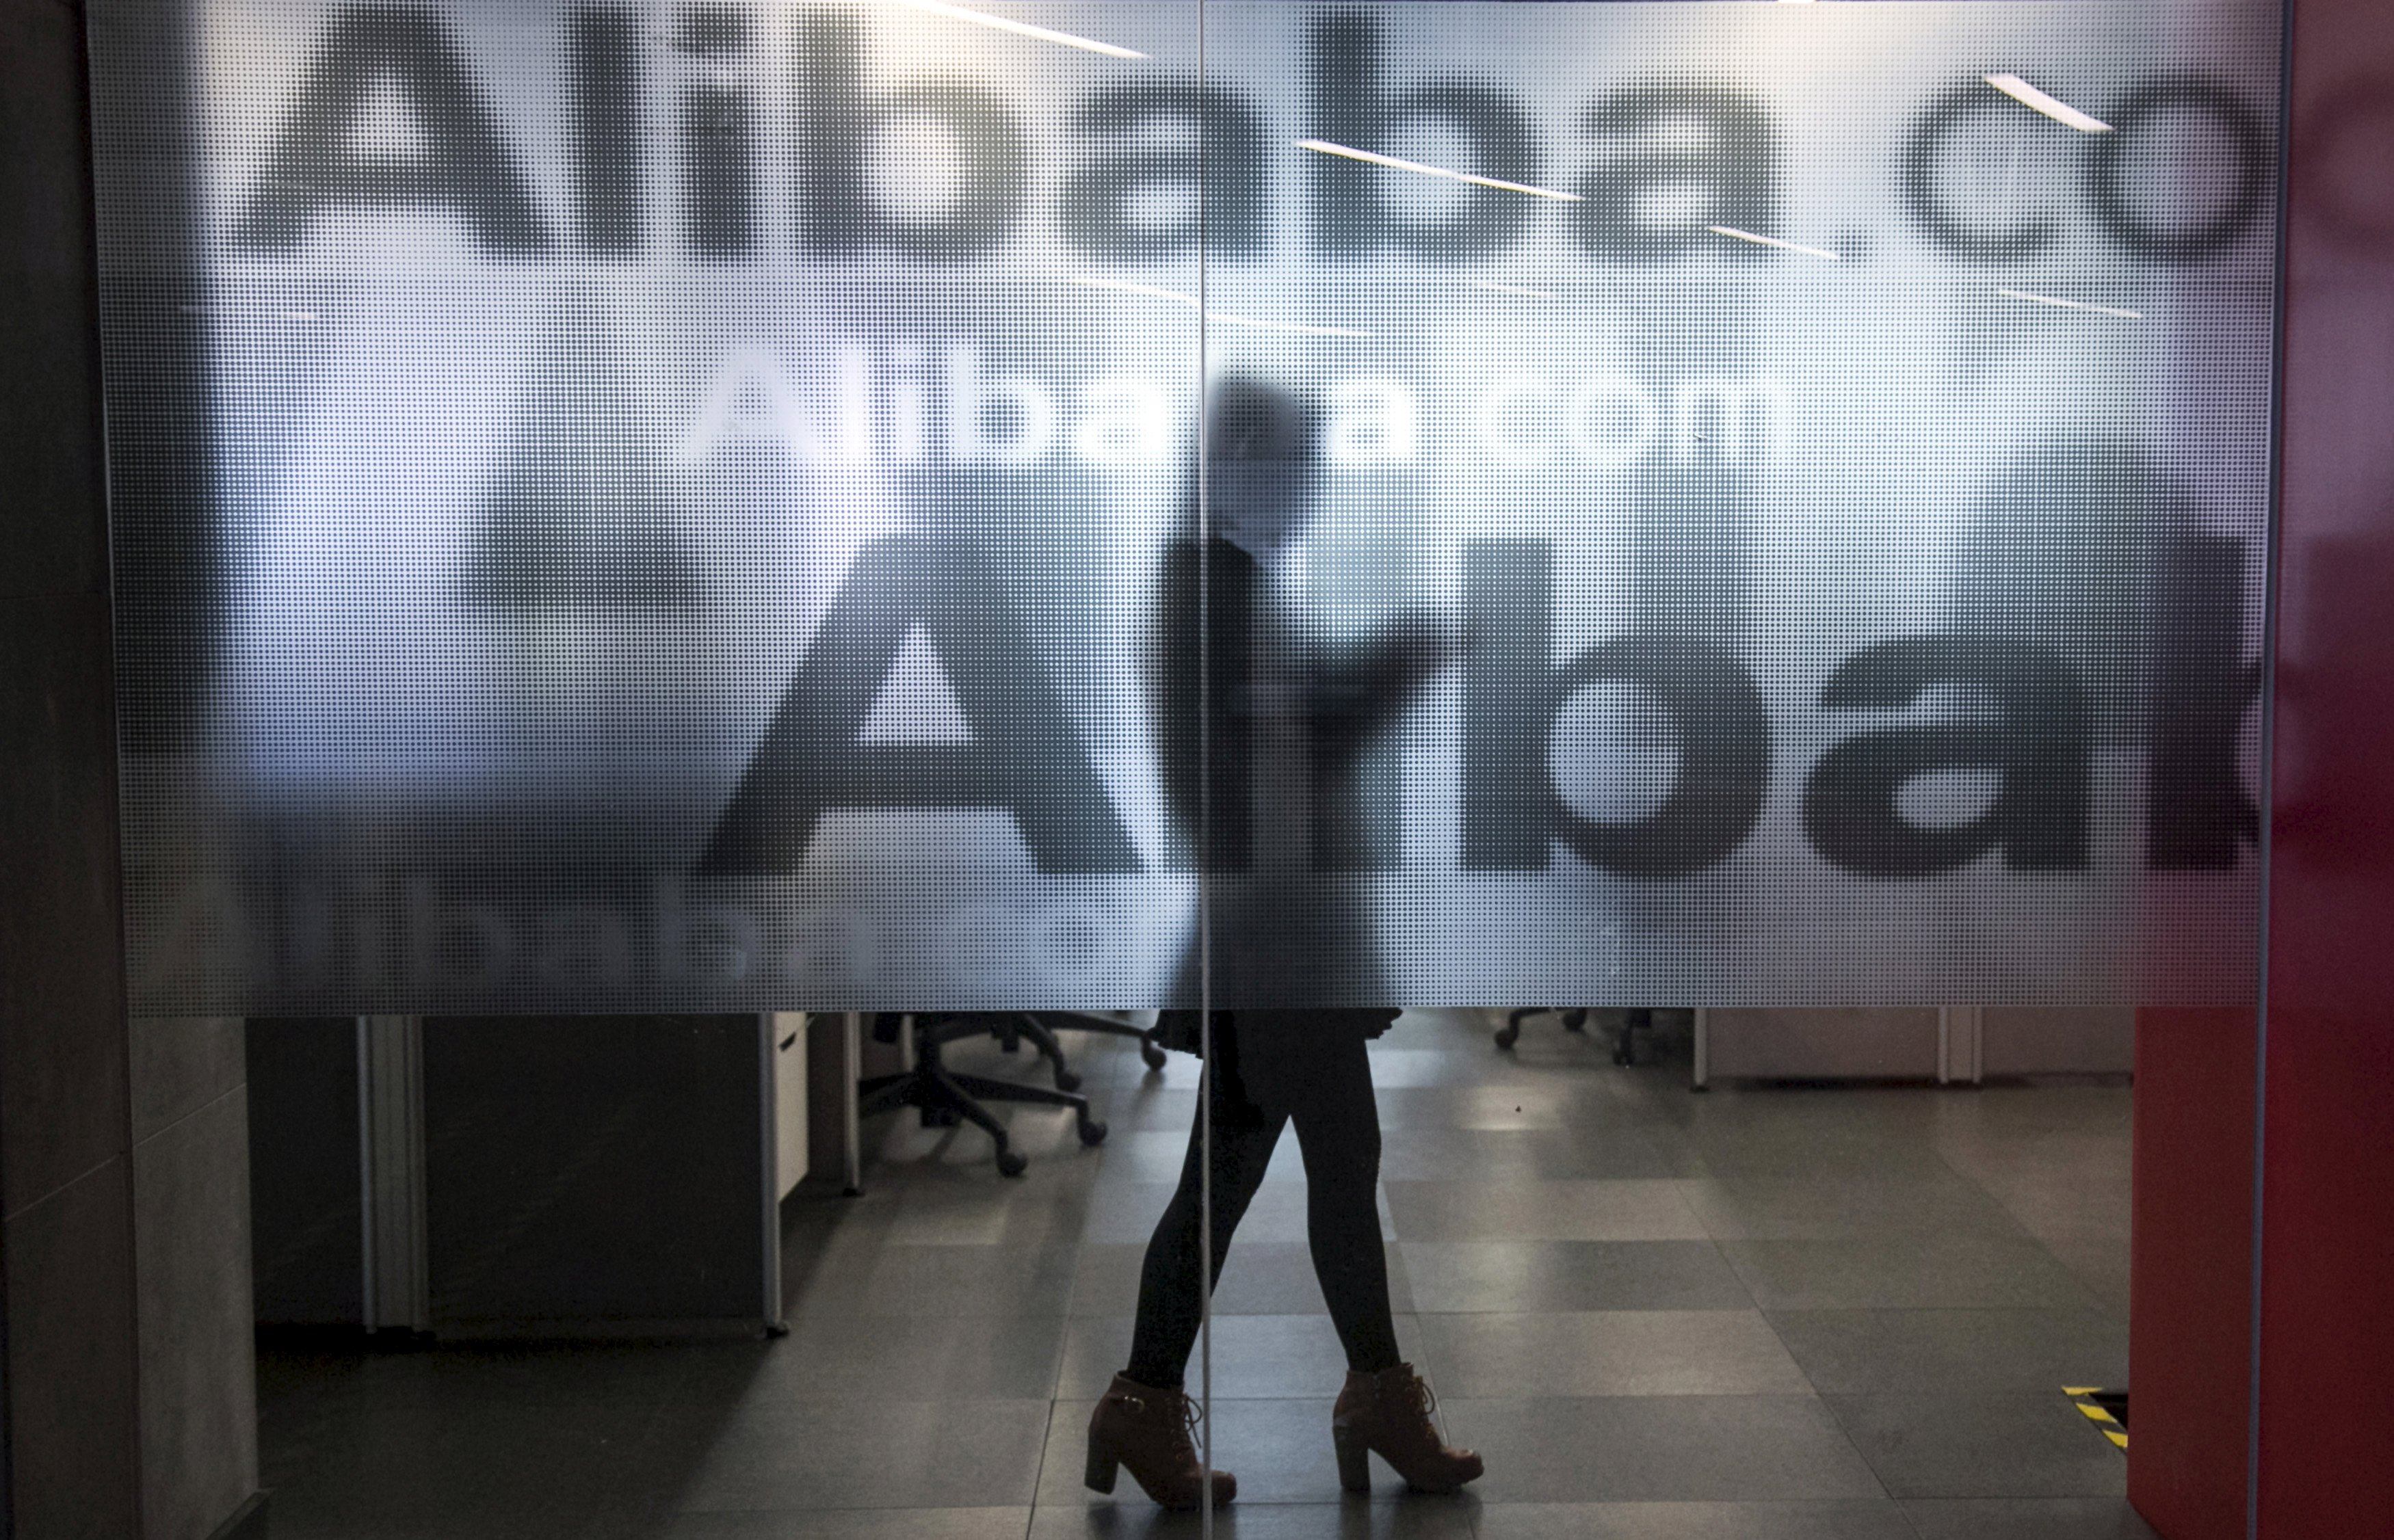 The Ministry of Industry and Information Technology said it will suspend work with Alibaba Cloud as a cybersecurity threat intelligence partner for six months